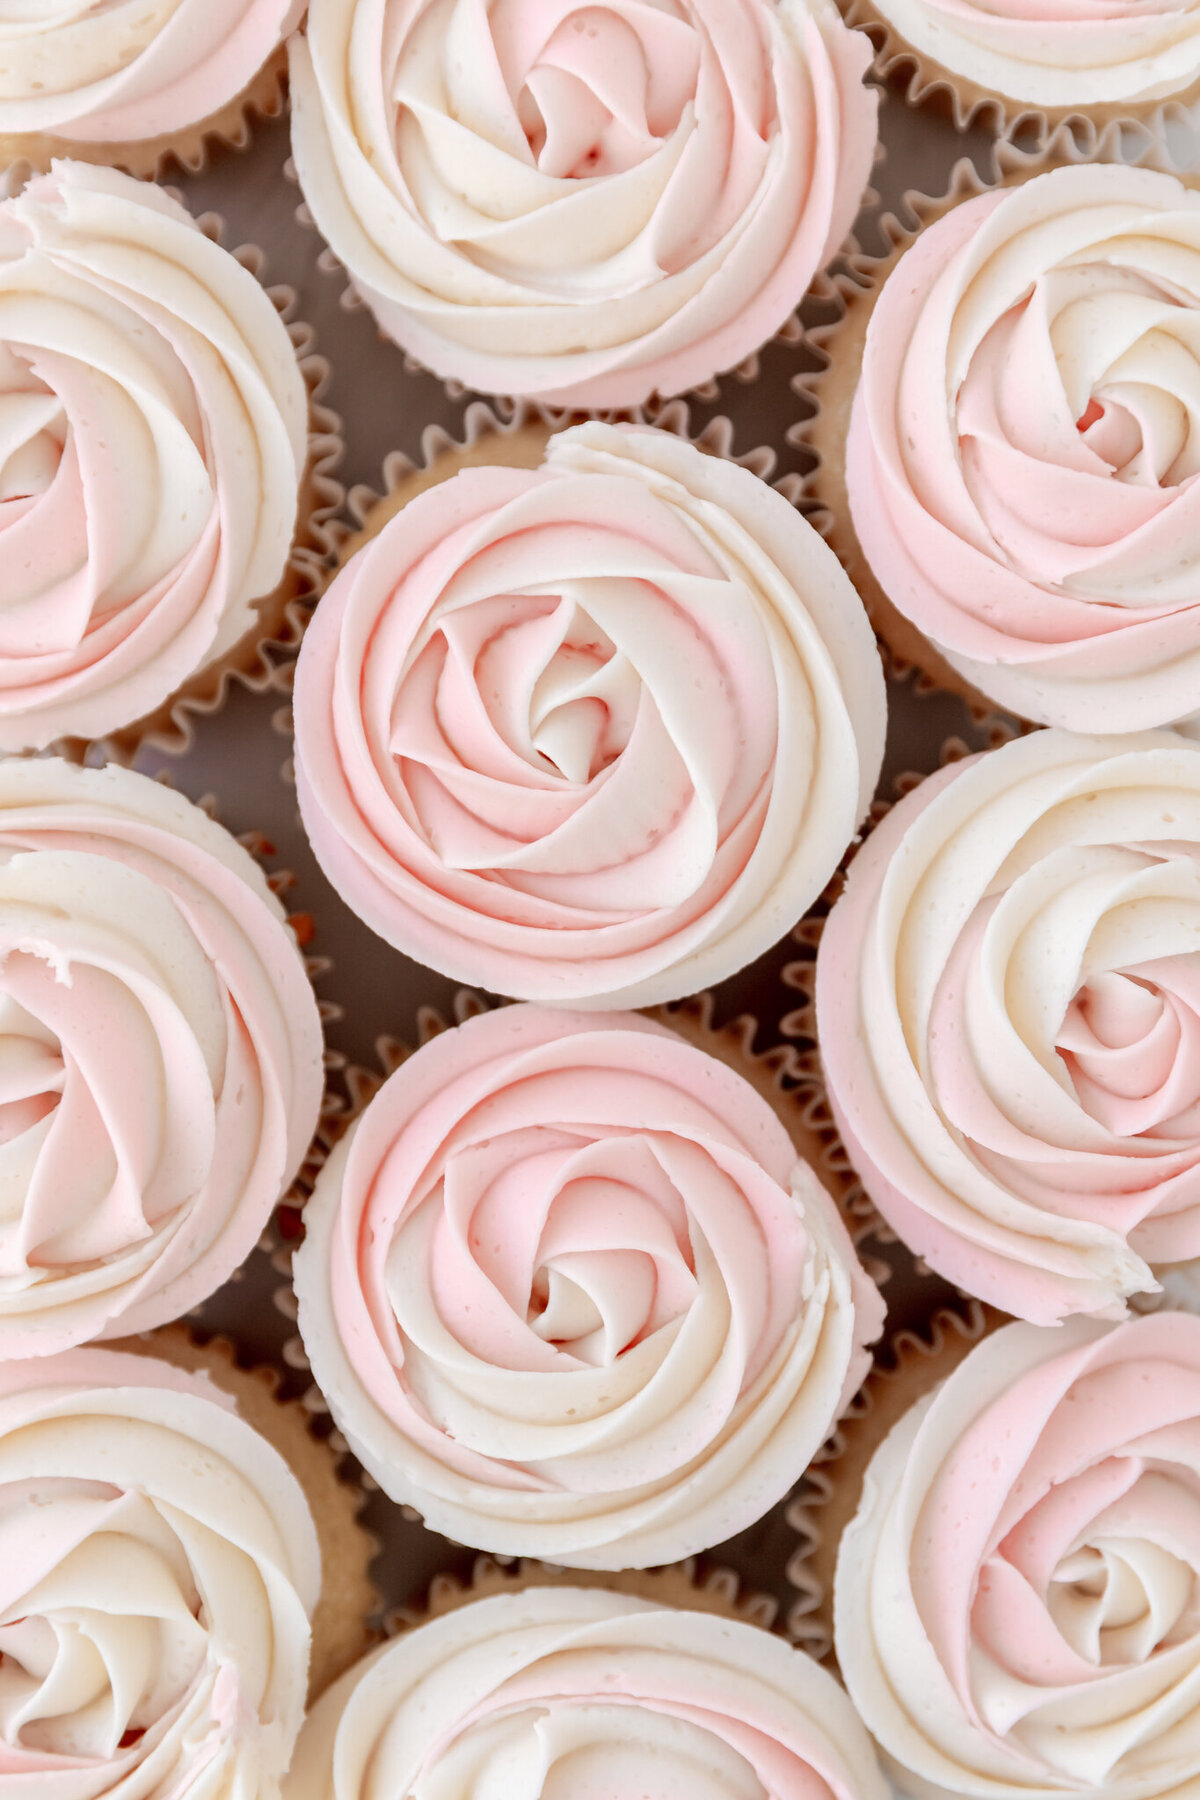 cupcakes topped with pink and white frosting